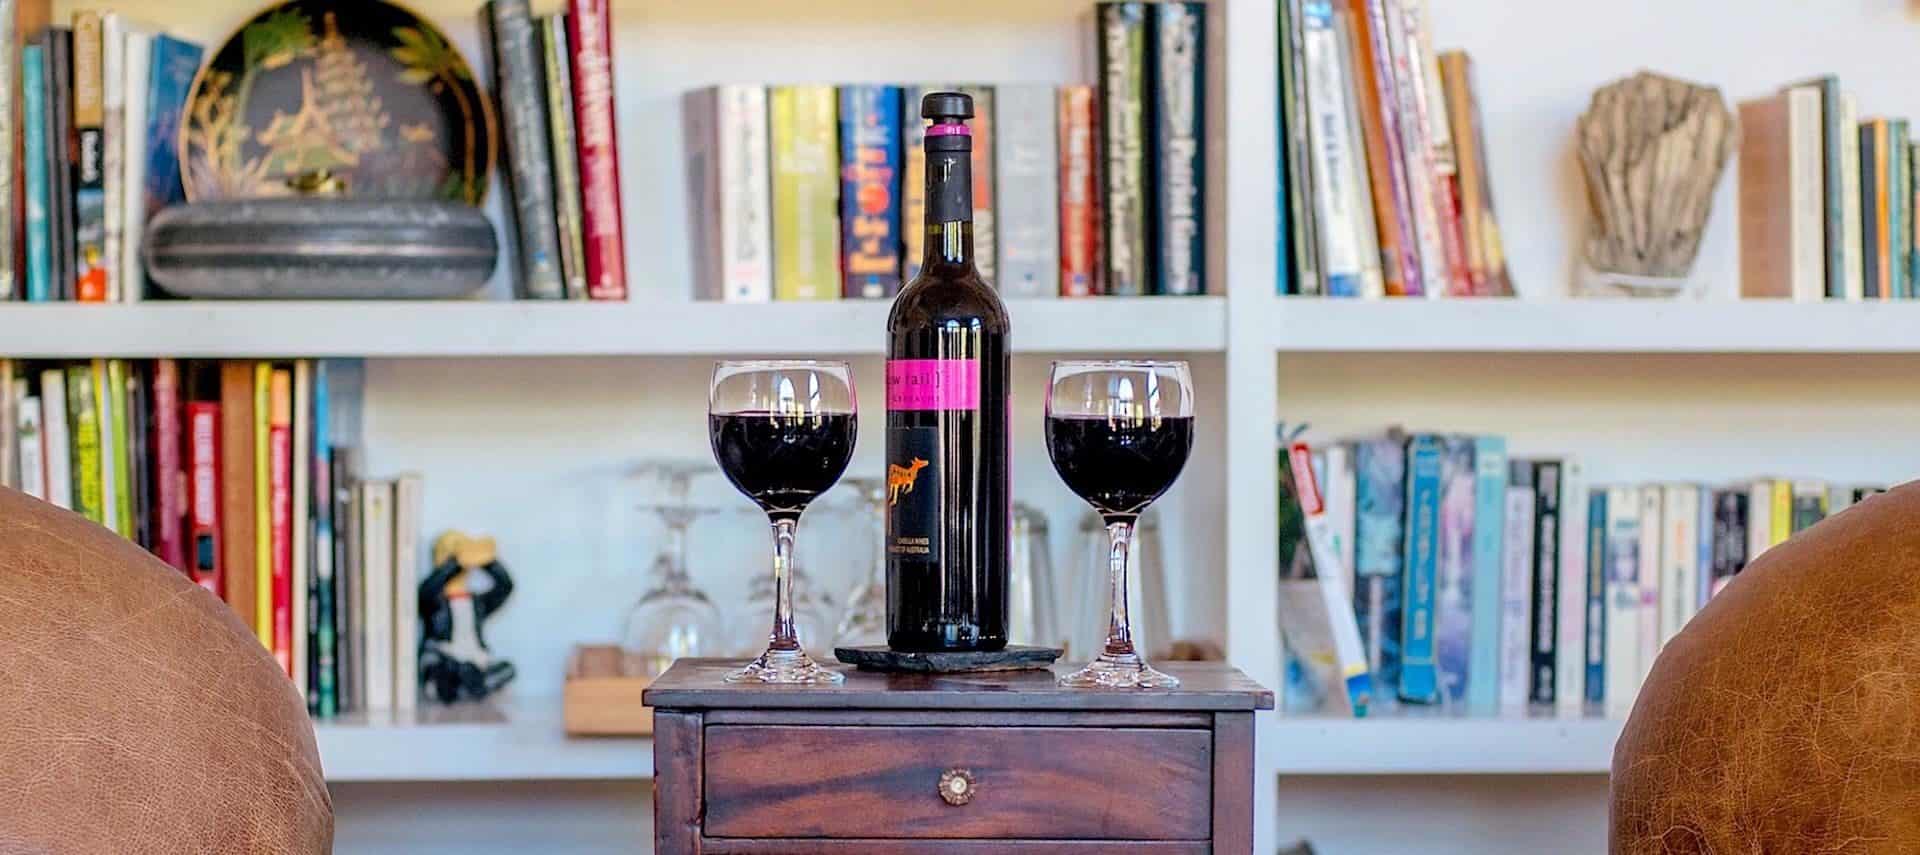 Close up view of two wine glasses full of red wine and bottle of wine on small wooden table with shelves of books in the background